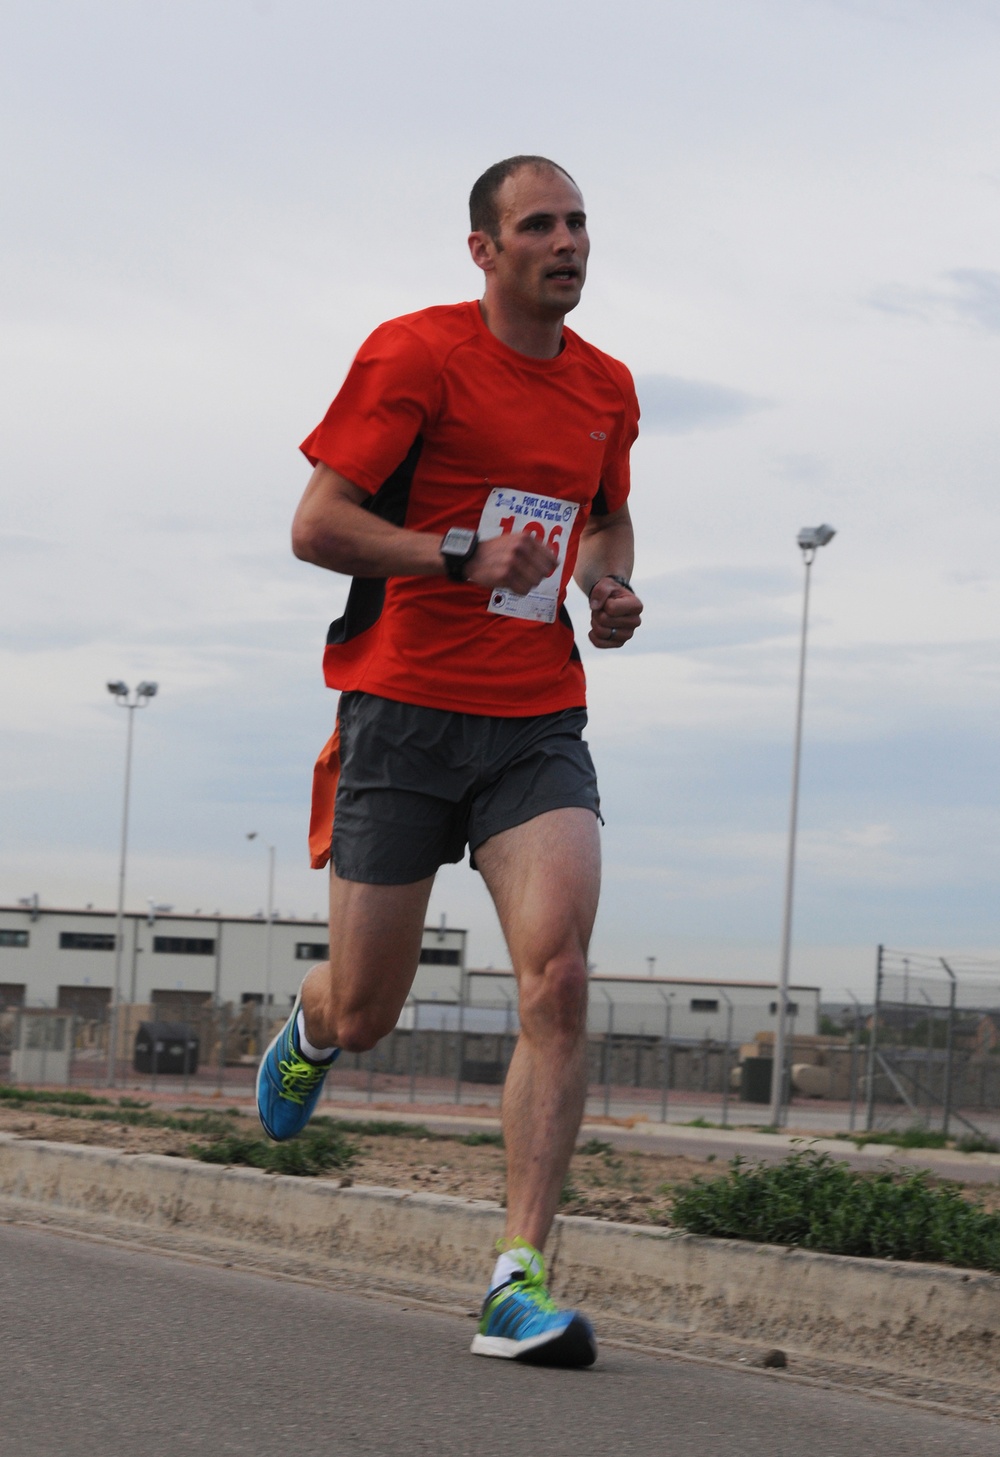 Fort Carson soldiers vie for place on 10-Miler team